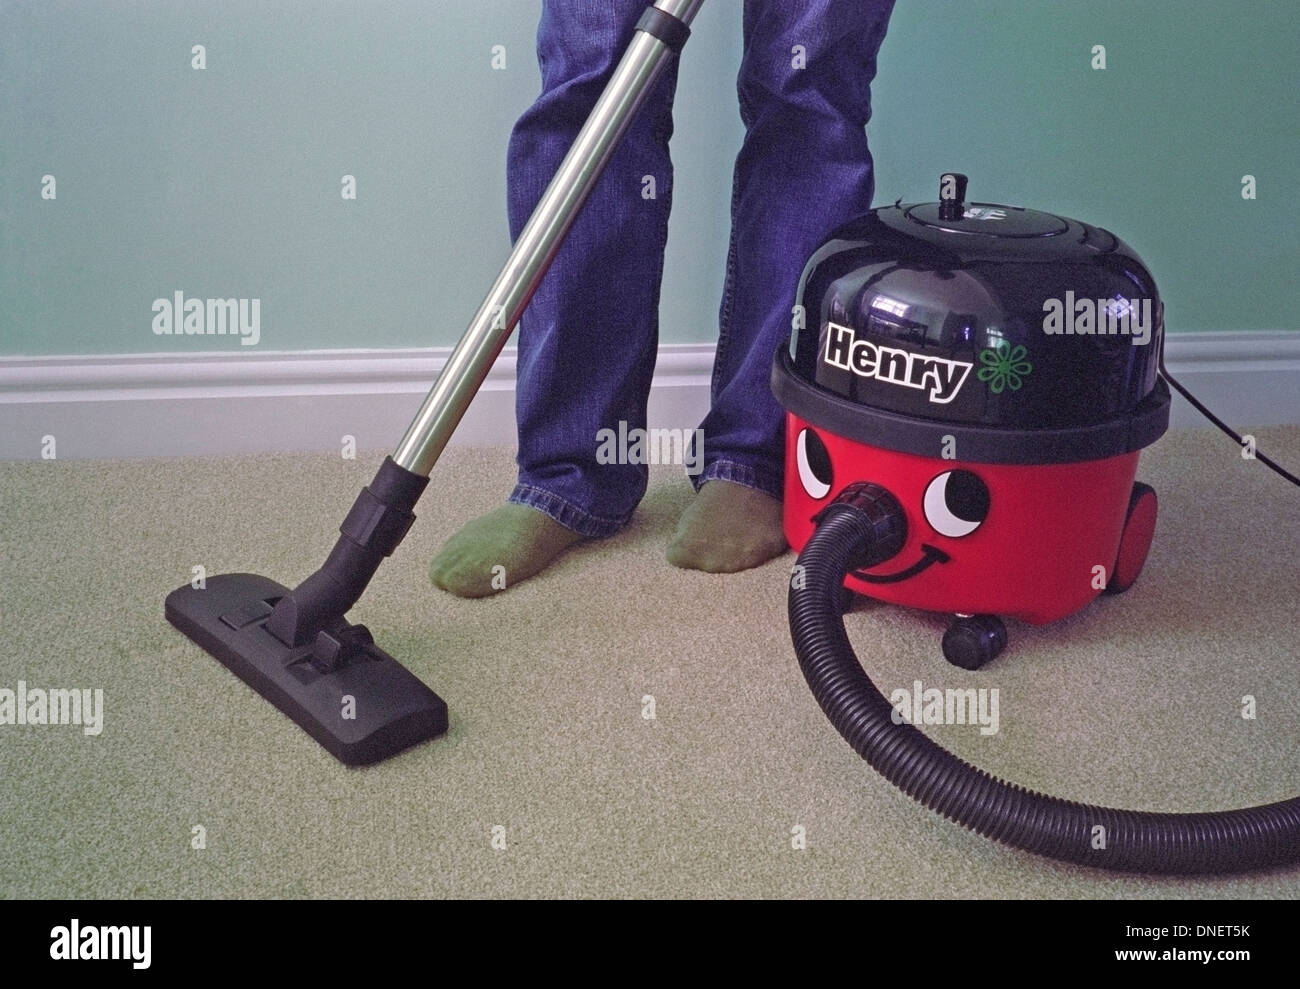 Caucasian Man Vacuuming a Carpet with a Henry Vacuum Cleaner MODEL RELEASED Stock Photo